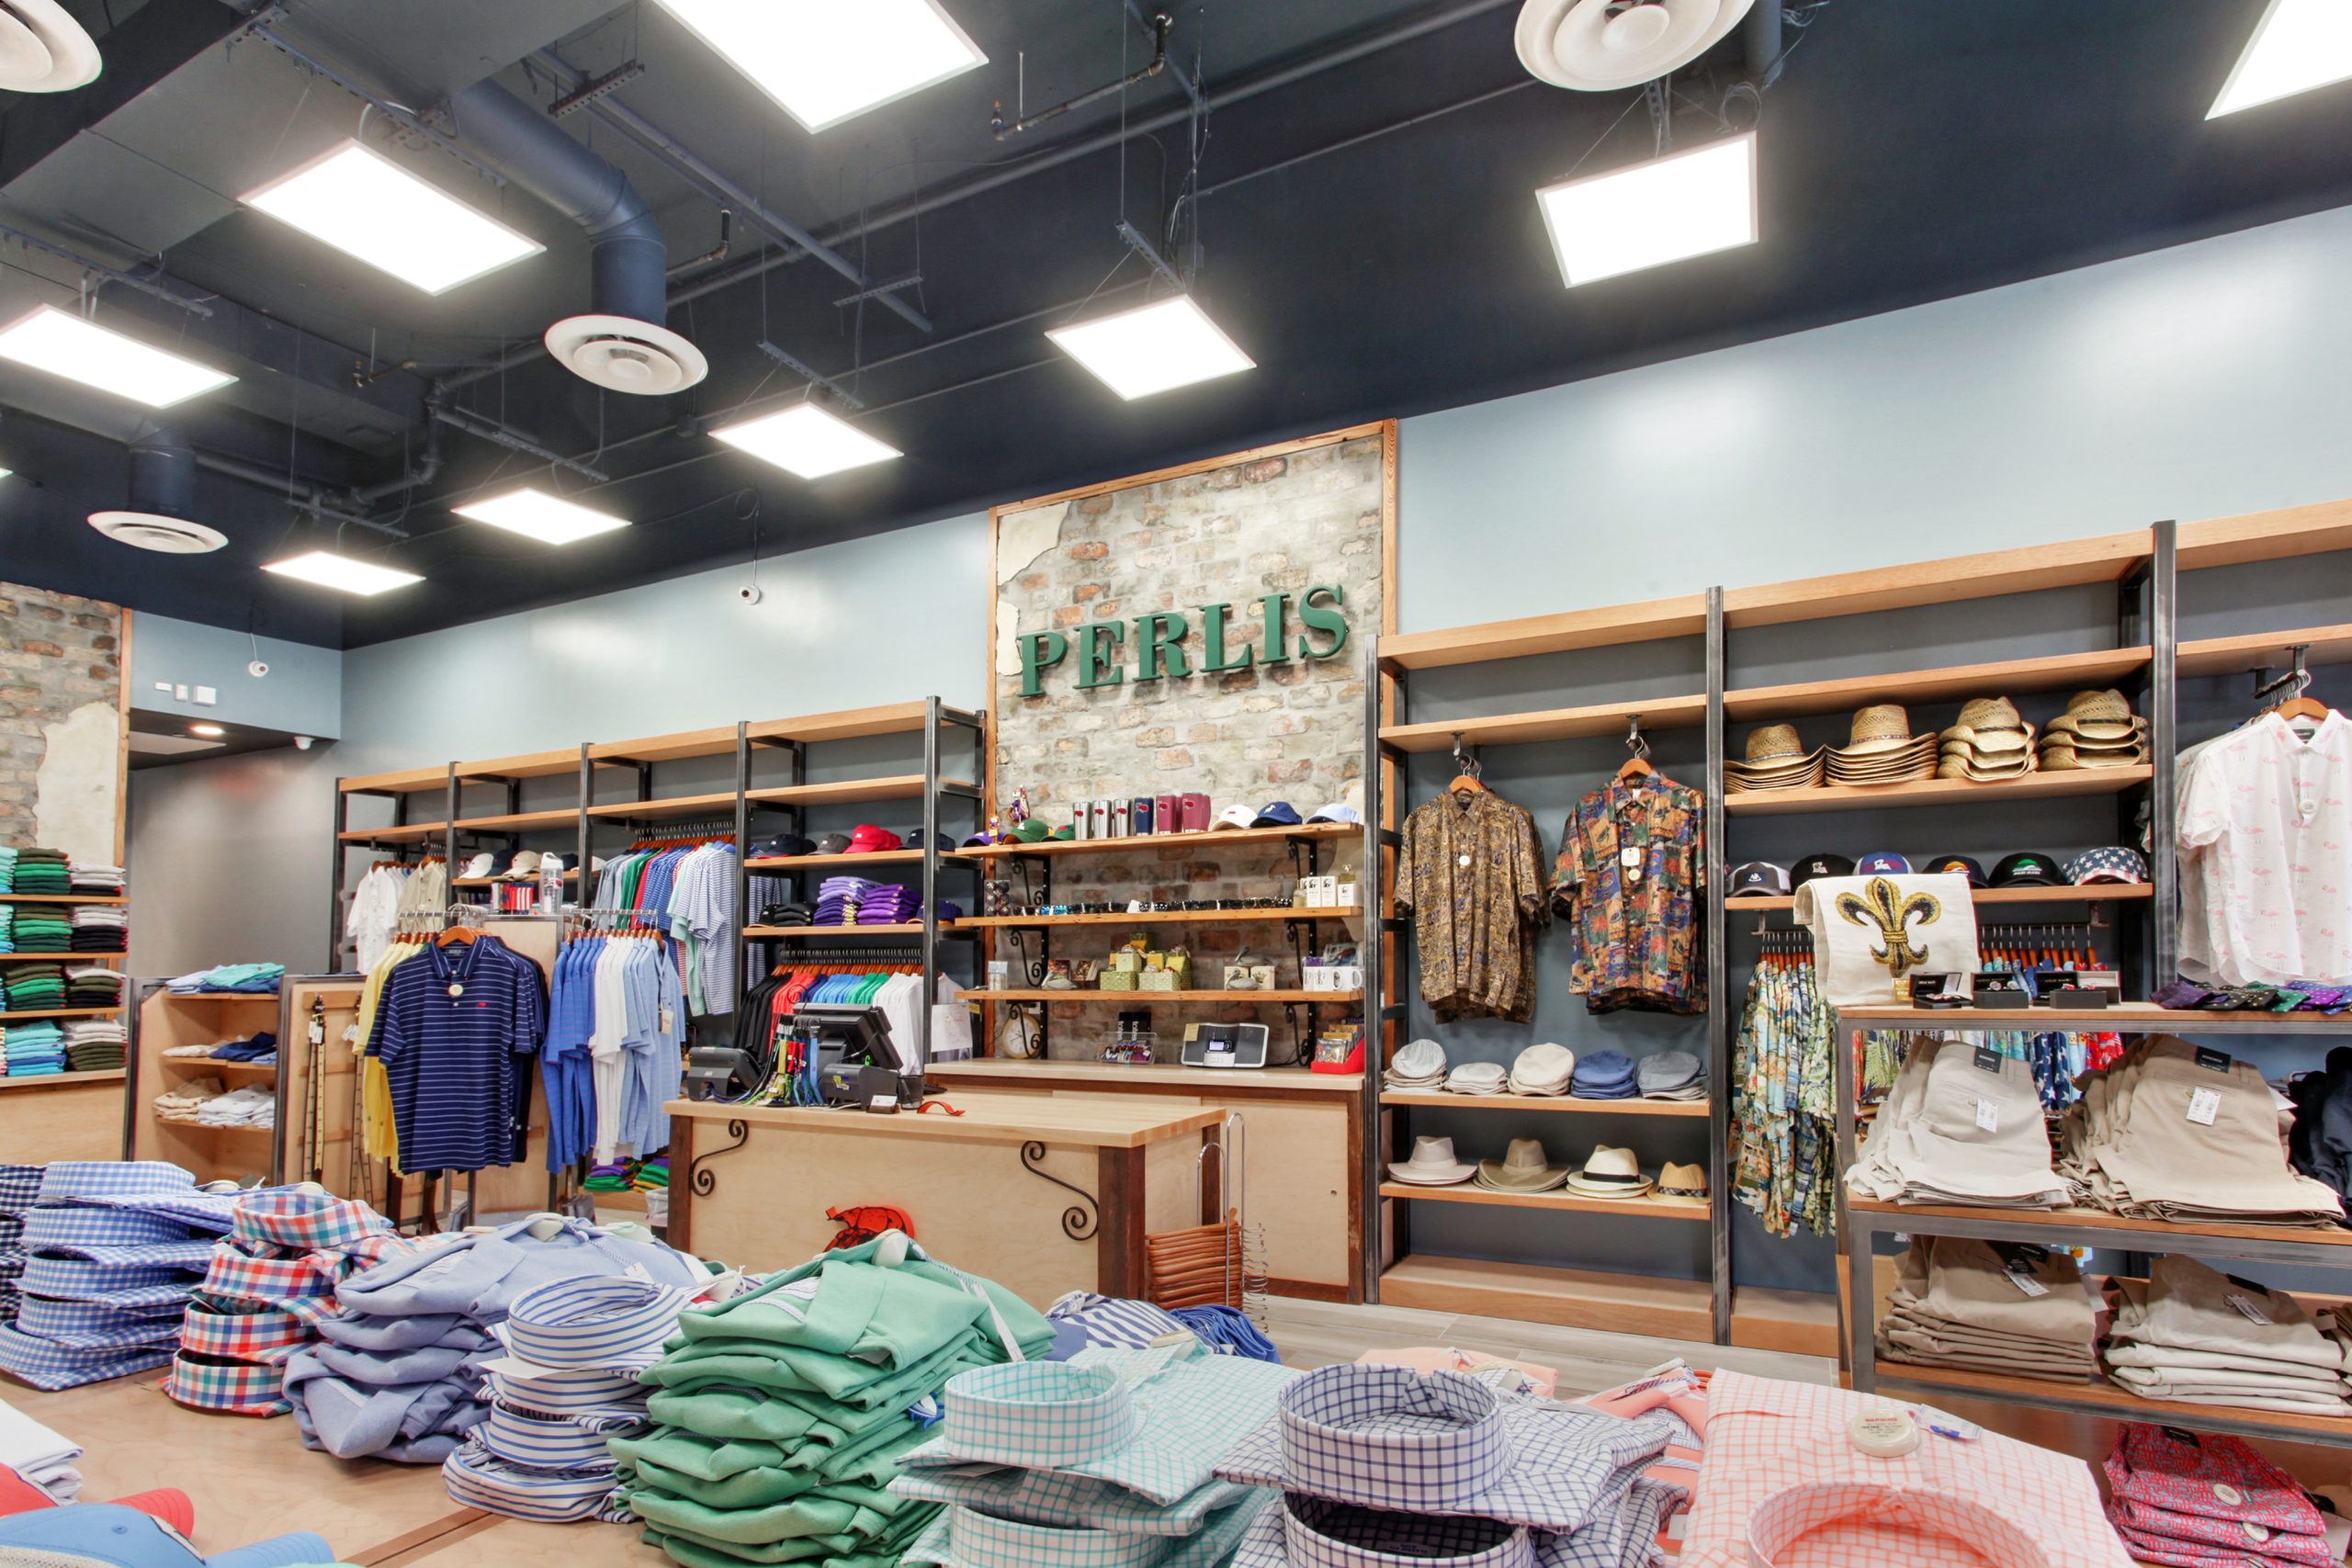 Interior of Perlis retail store designed and built by DMG's commercial construction division